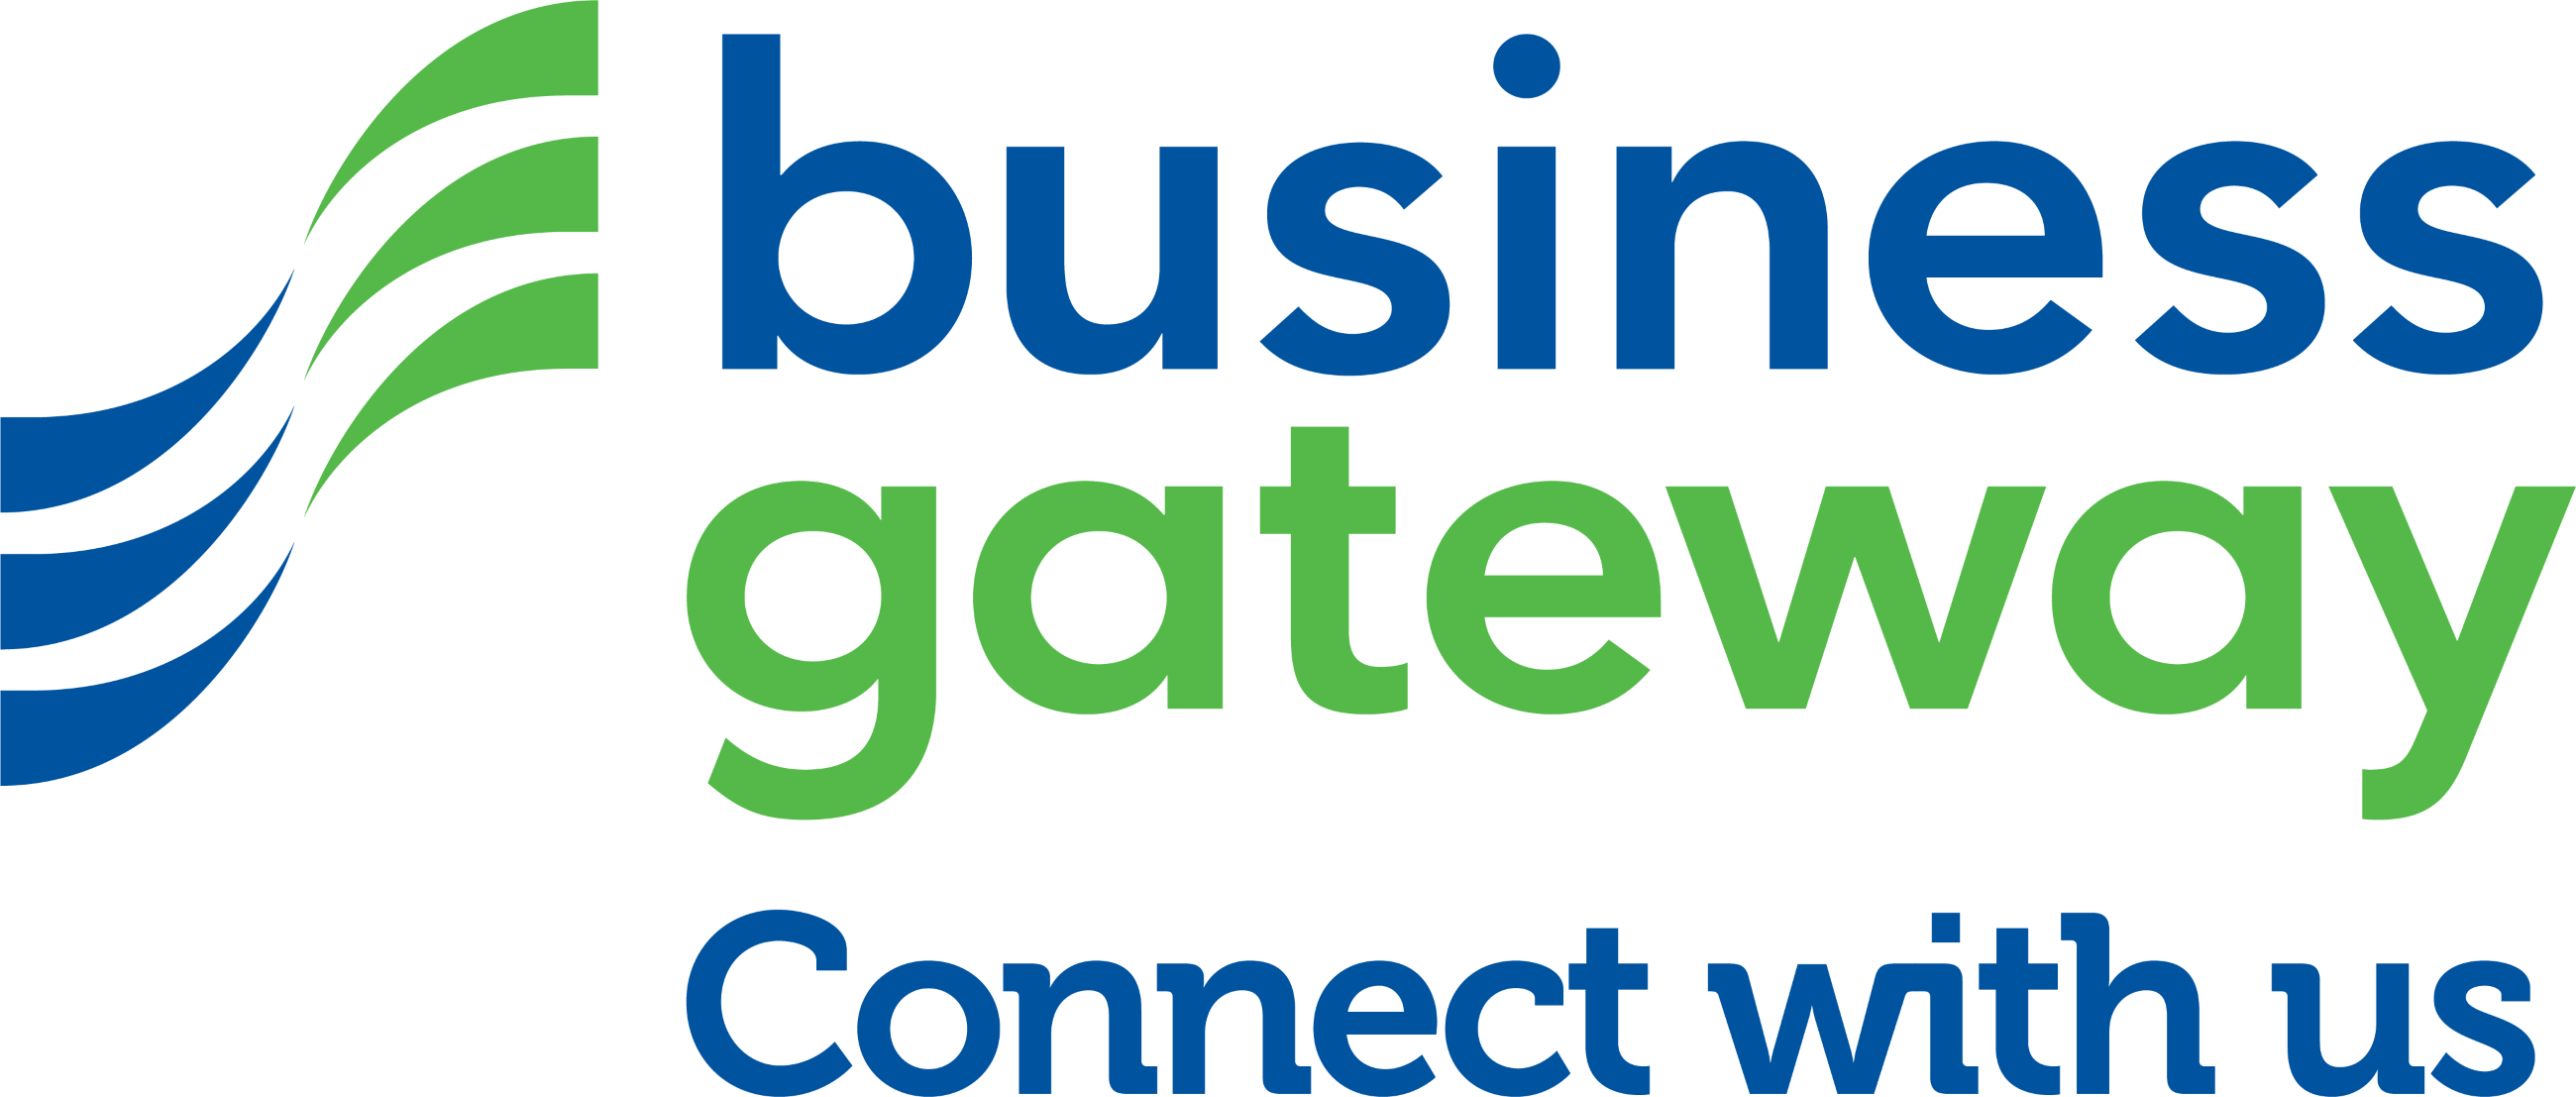 Business gateway, connect with us